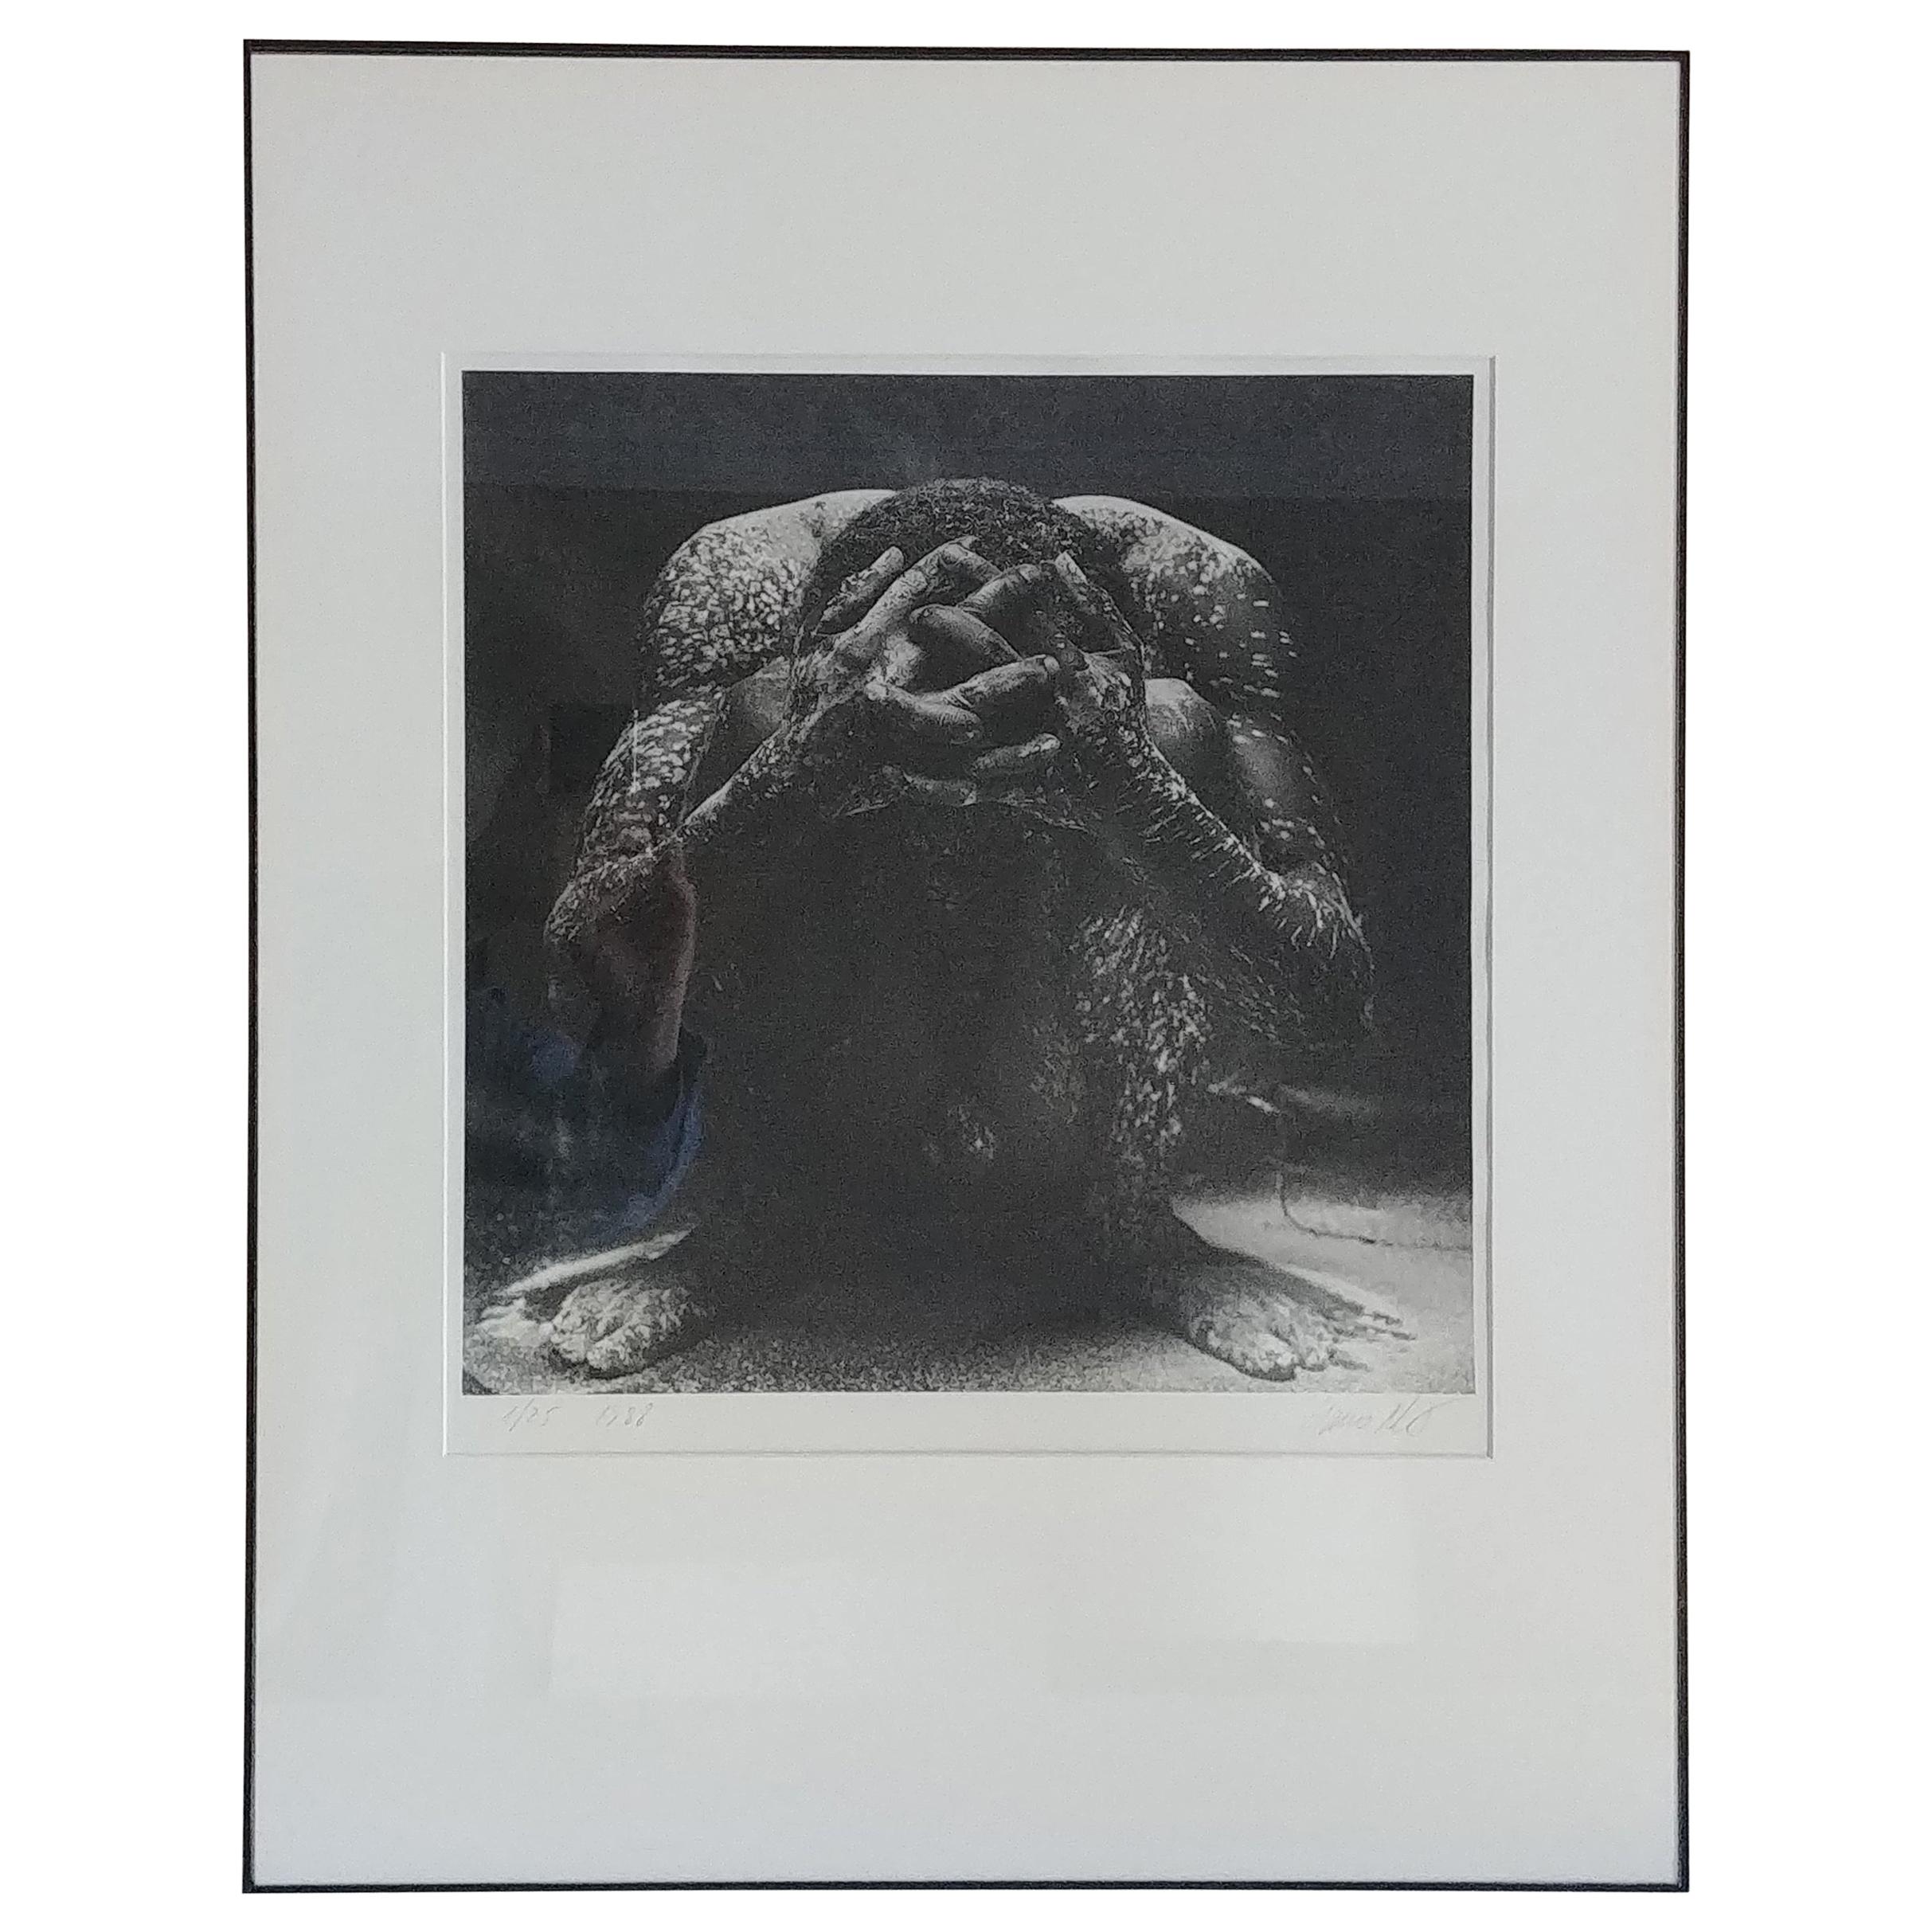 Mario Cravo Neto, "Voodoo Figure" Photography Signed, Dated For Sale